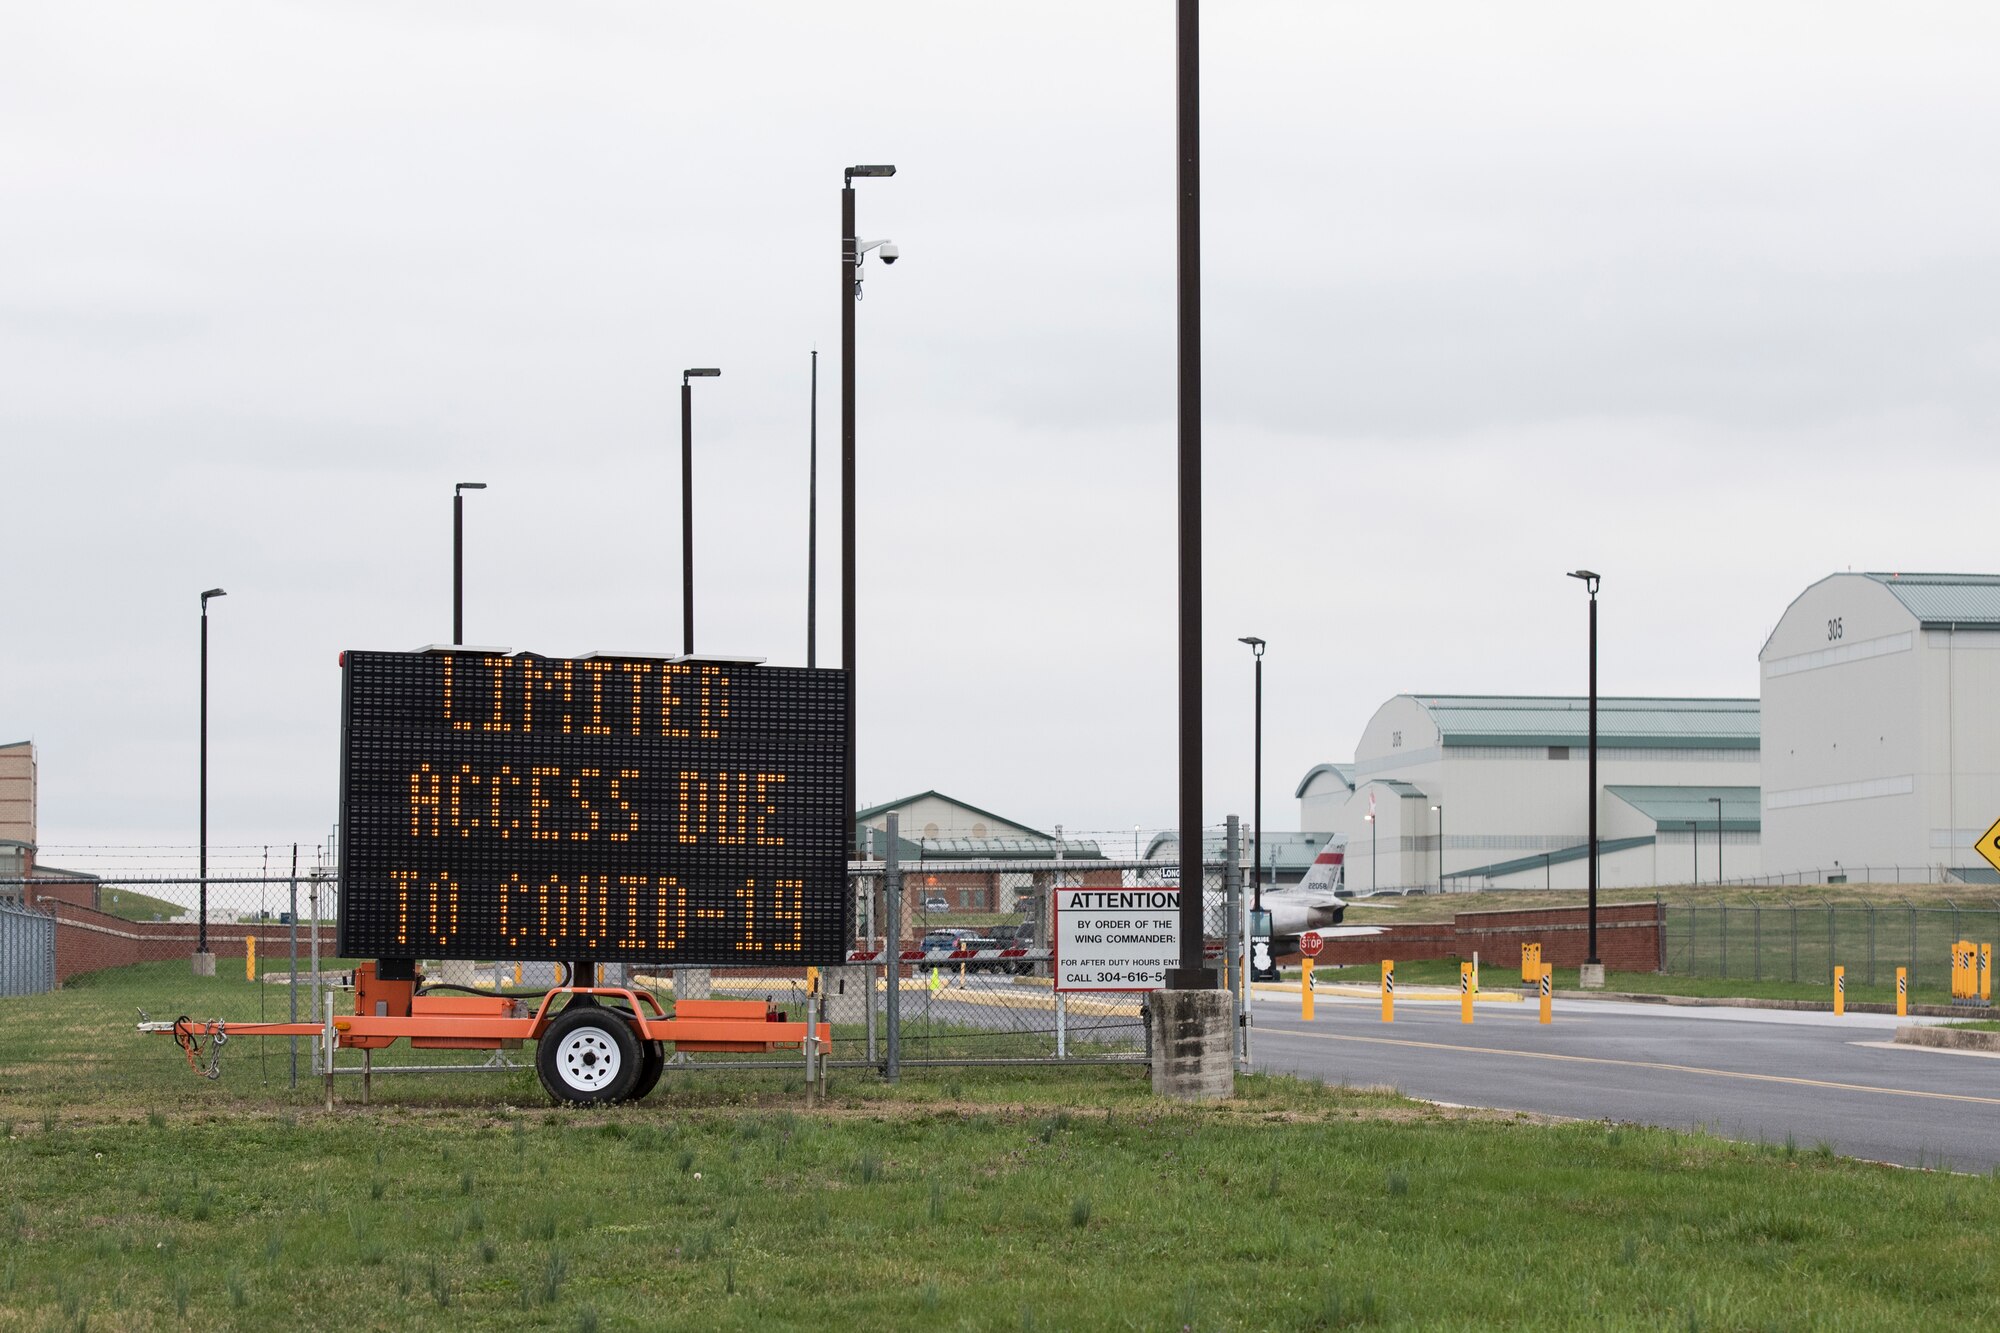 A sign at the main gate of the 167th Airlift Wing warns drivers of limited access to the installation. The wing began transitioning Airmen to telework in mid-March and within a week only mission essential personnel were working on the base. Everyone entering the basewas medically screened before proceeding through the gate.